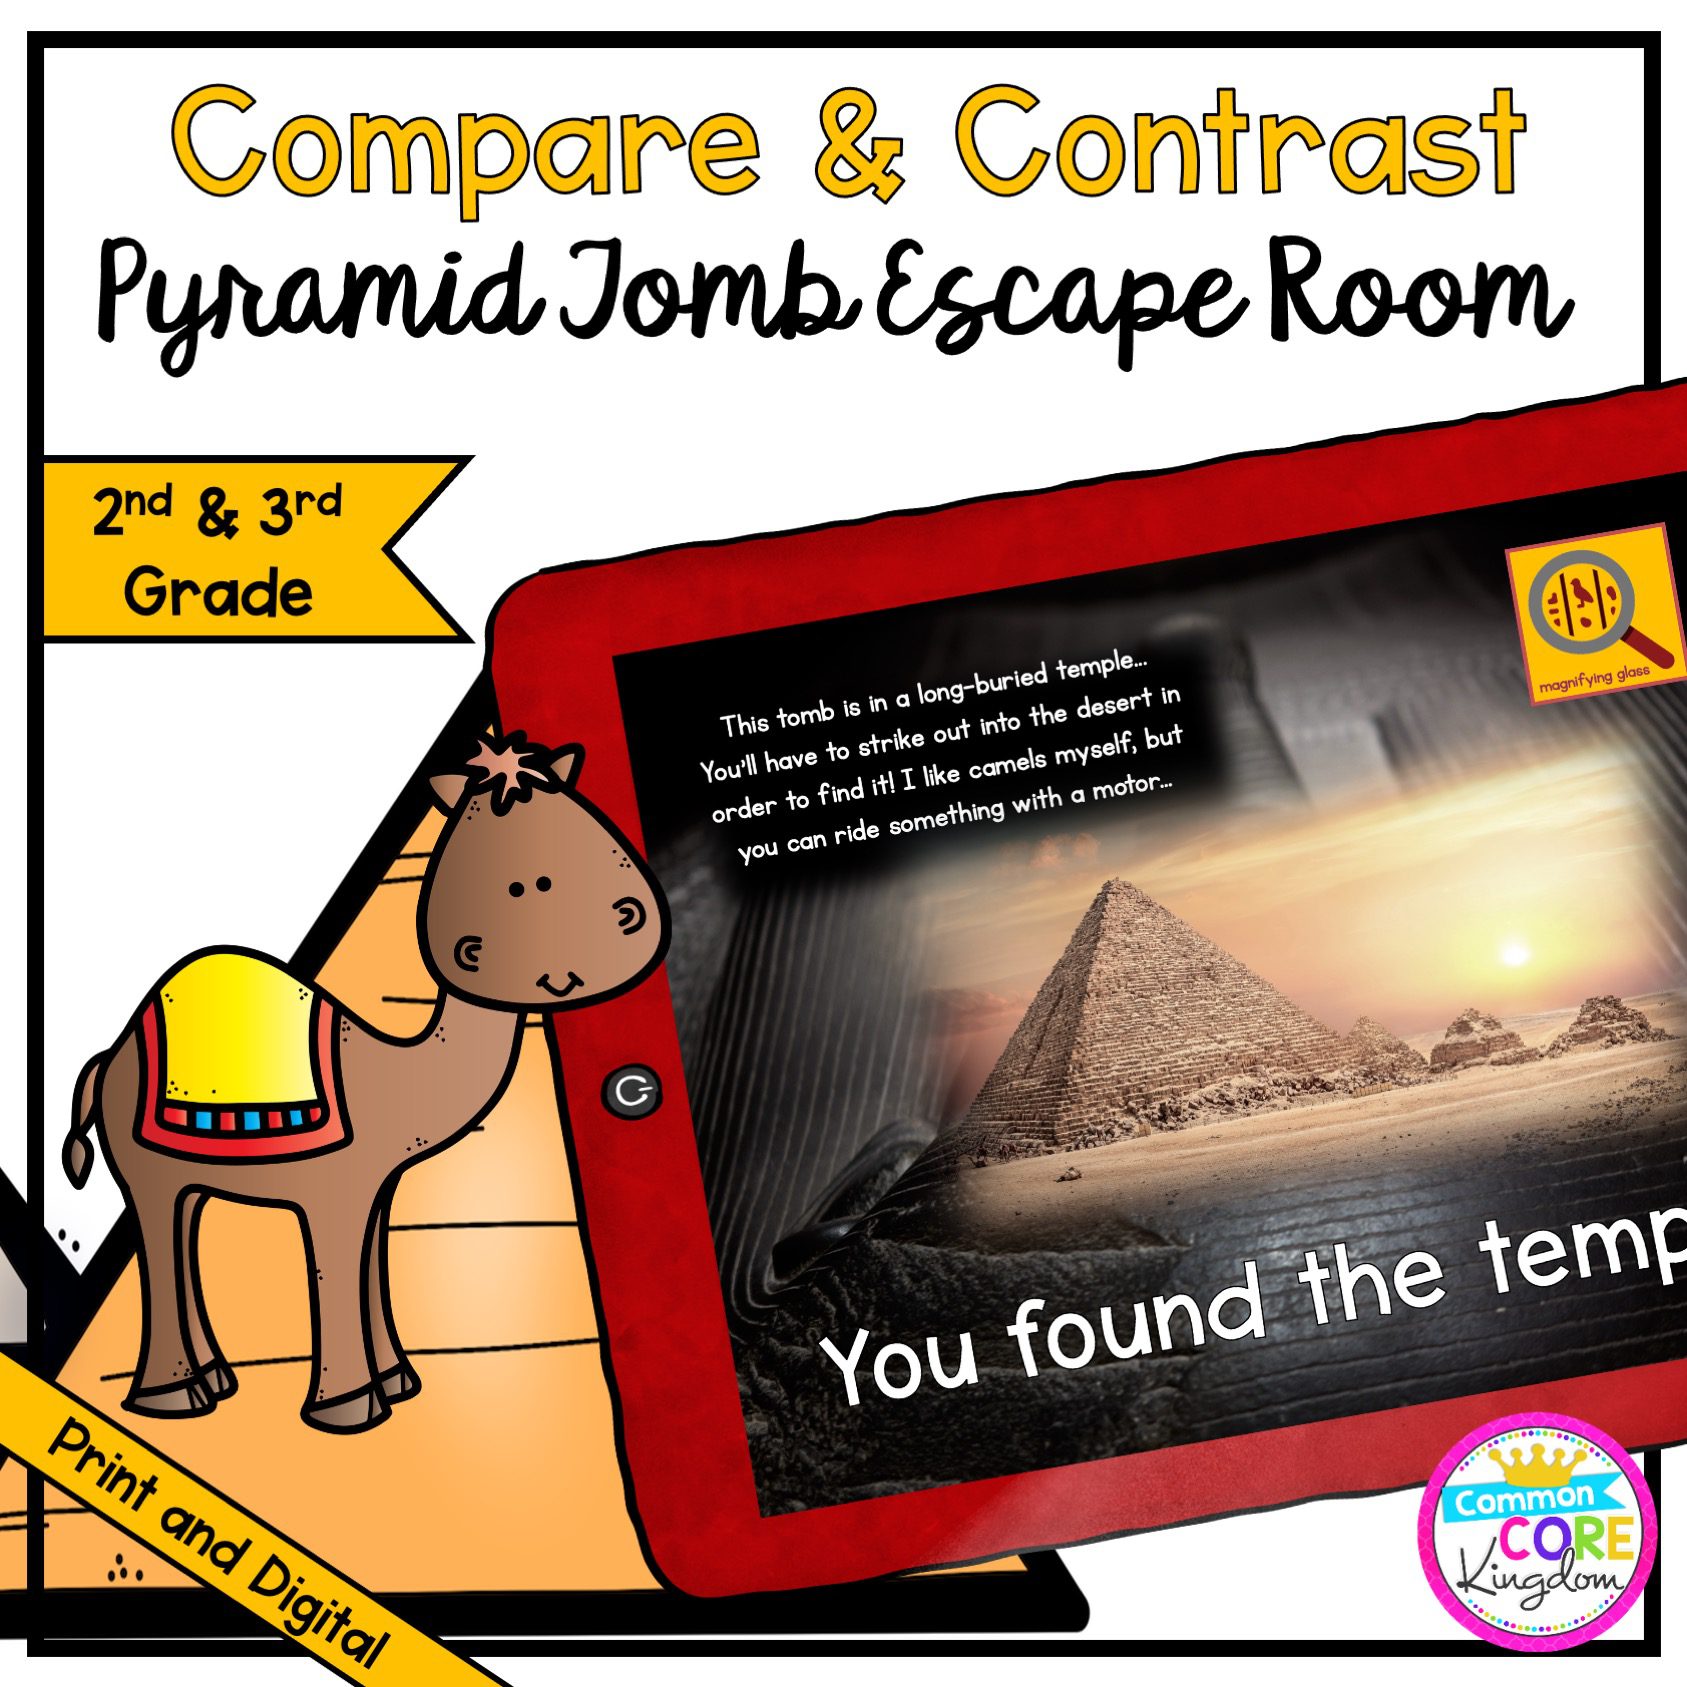 Compare & Contrast - Pyramid Tomb Escape Room for 2nd & 3rd Grade in Digital & Printable Format